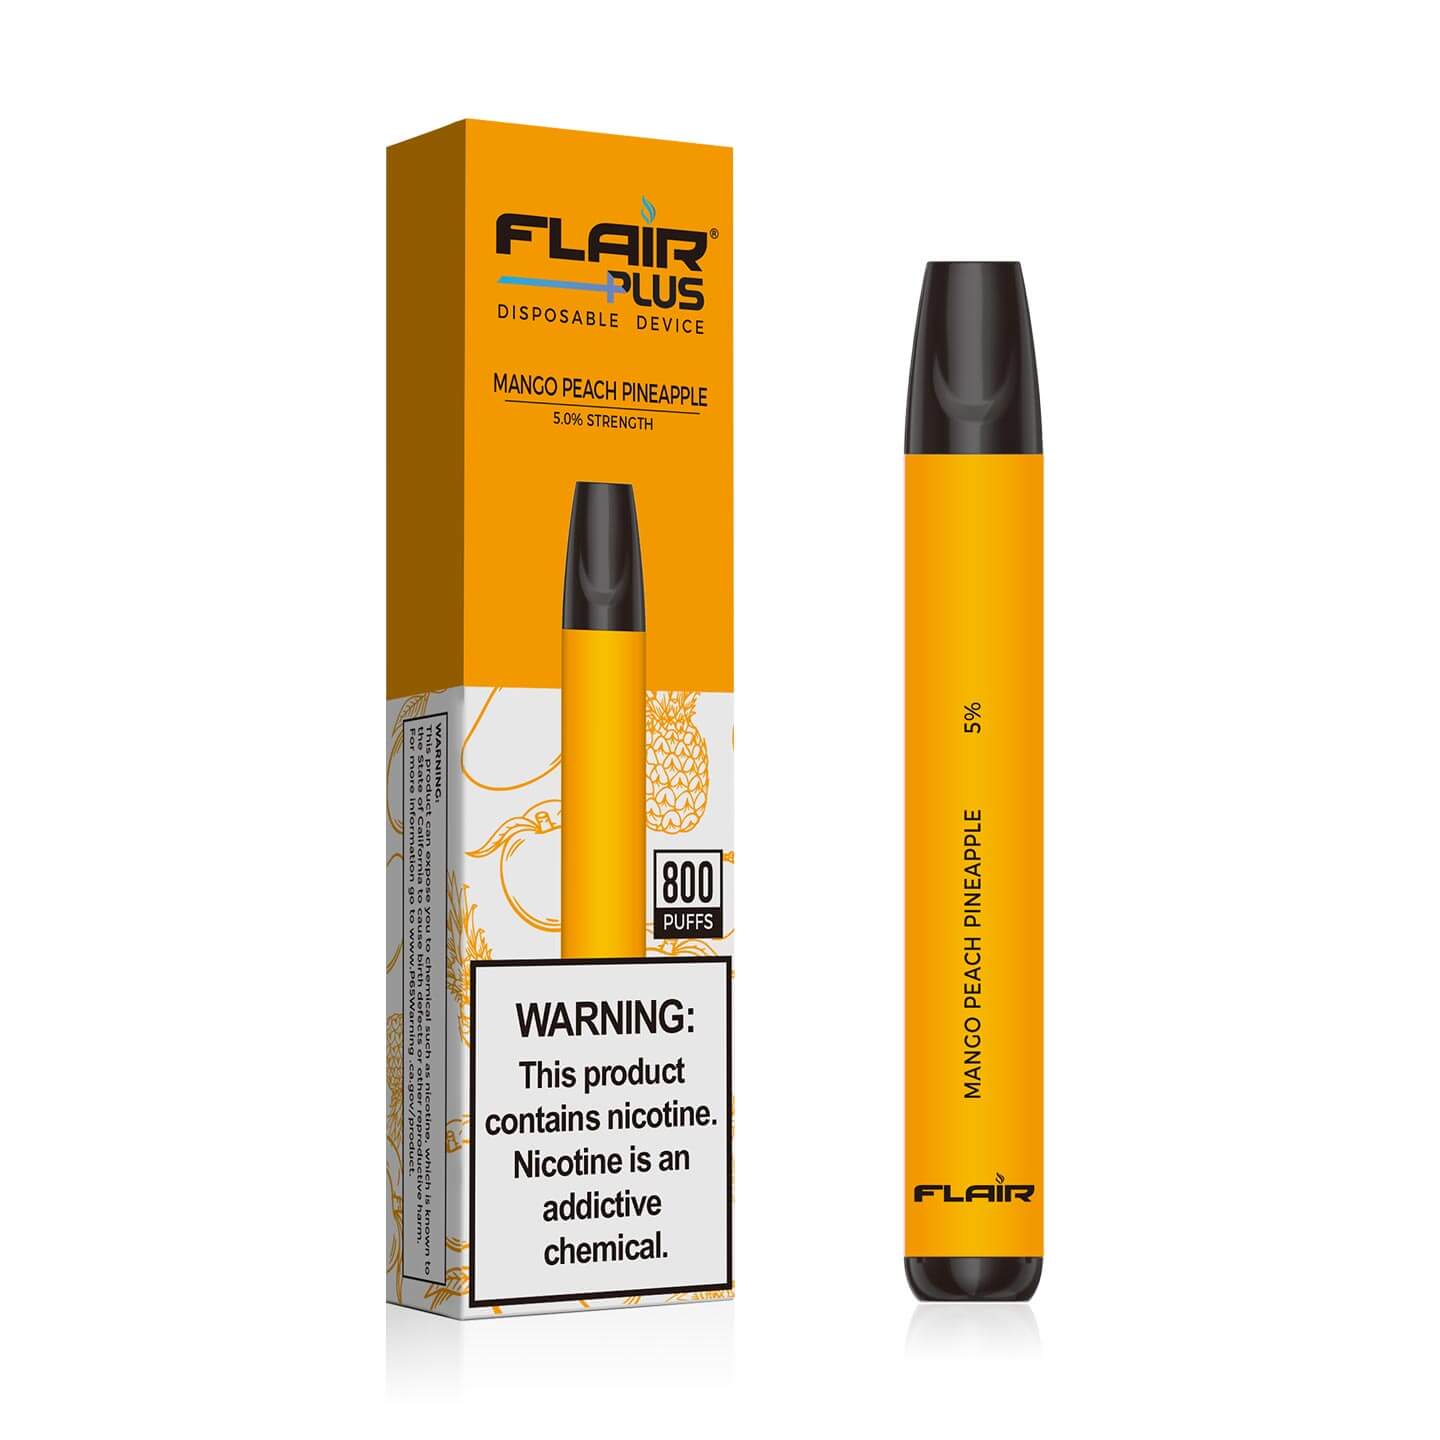 Flair Plus disposable device | 800 puffs | Cheapest vape pen at $12.99 - Smok City